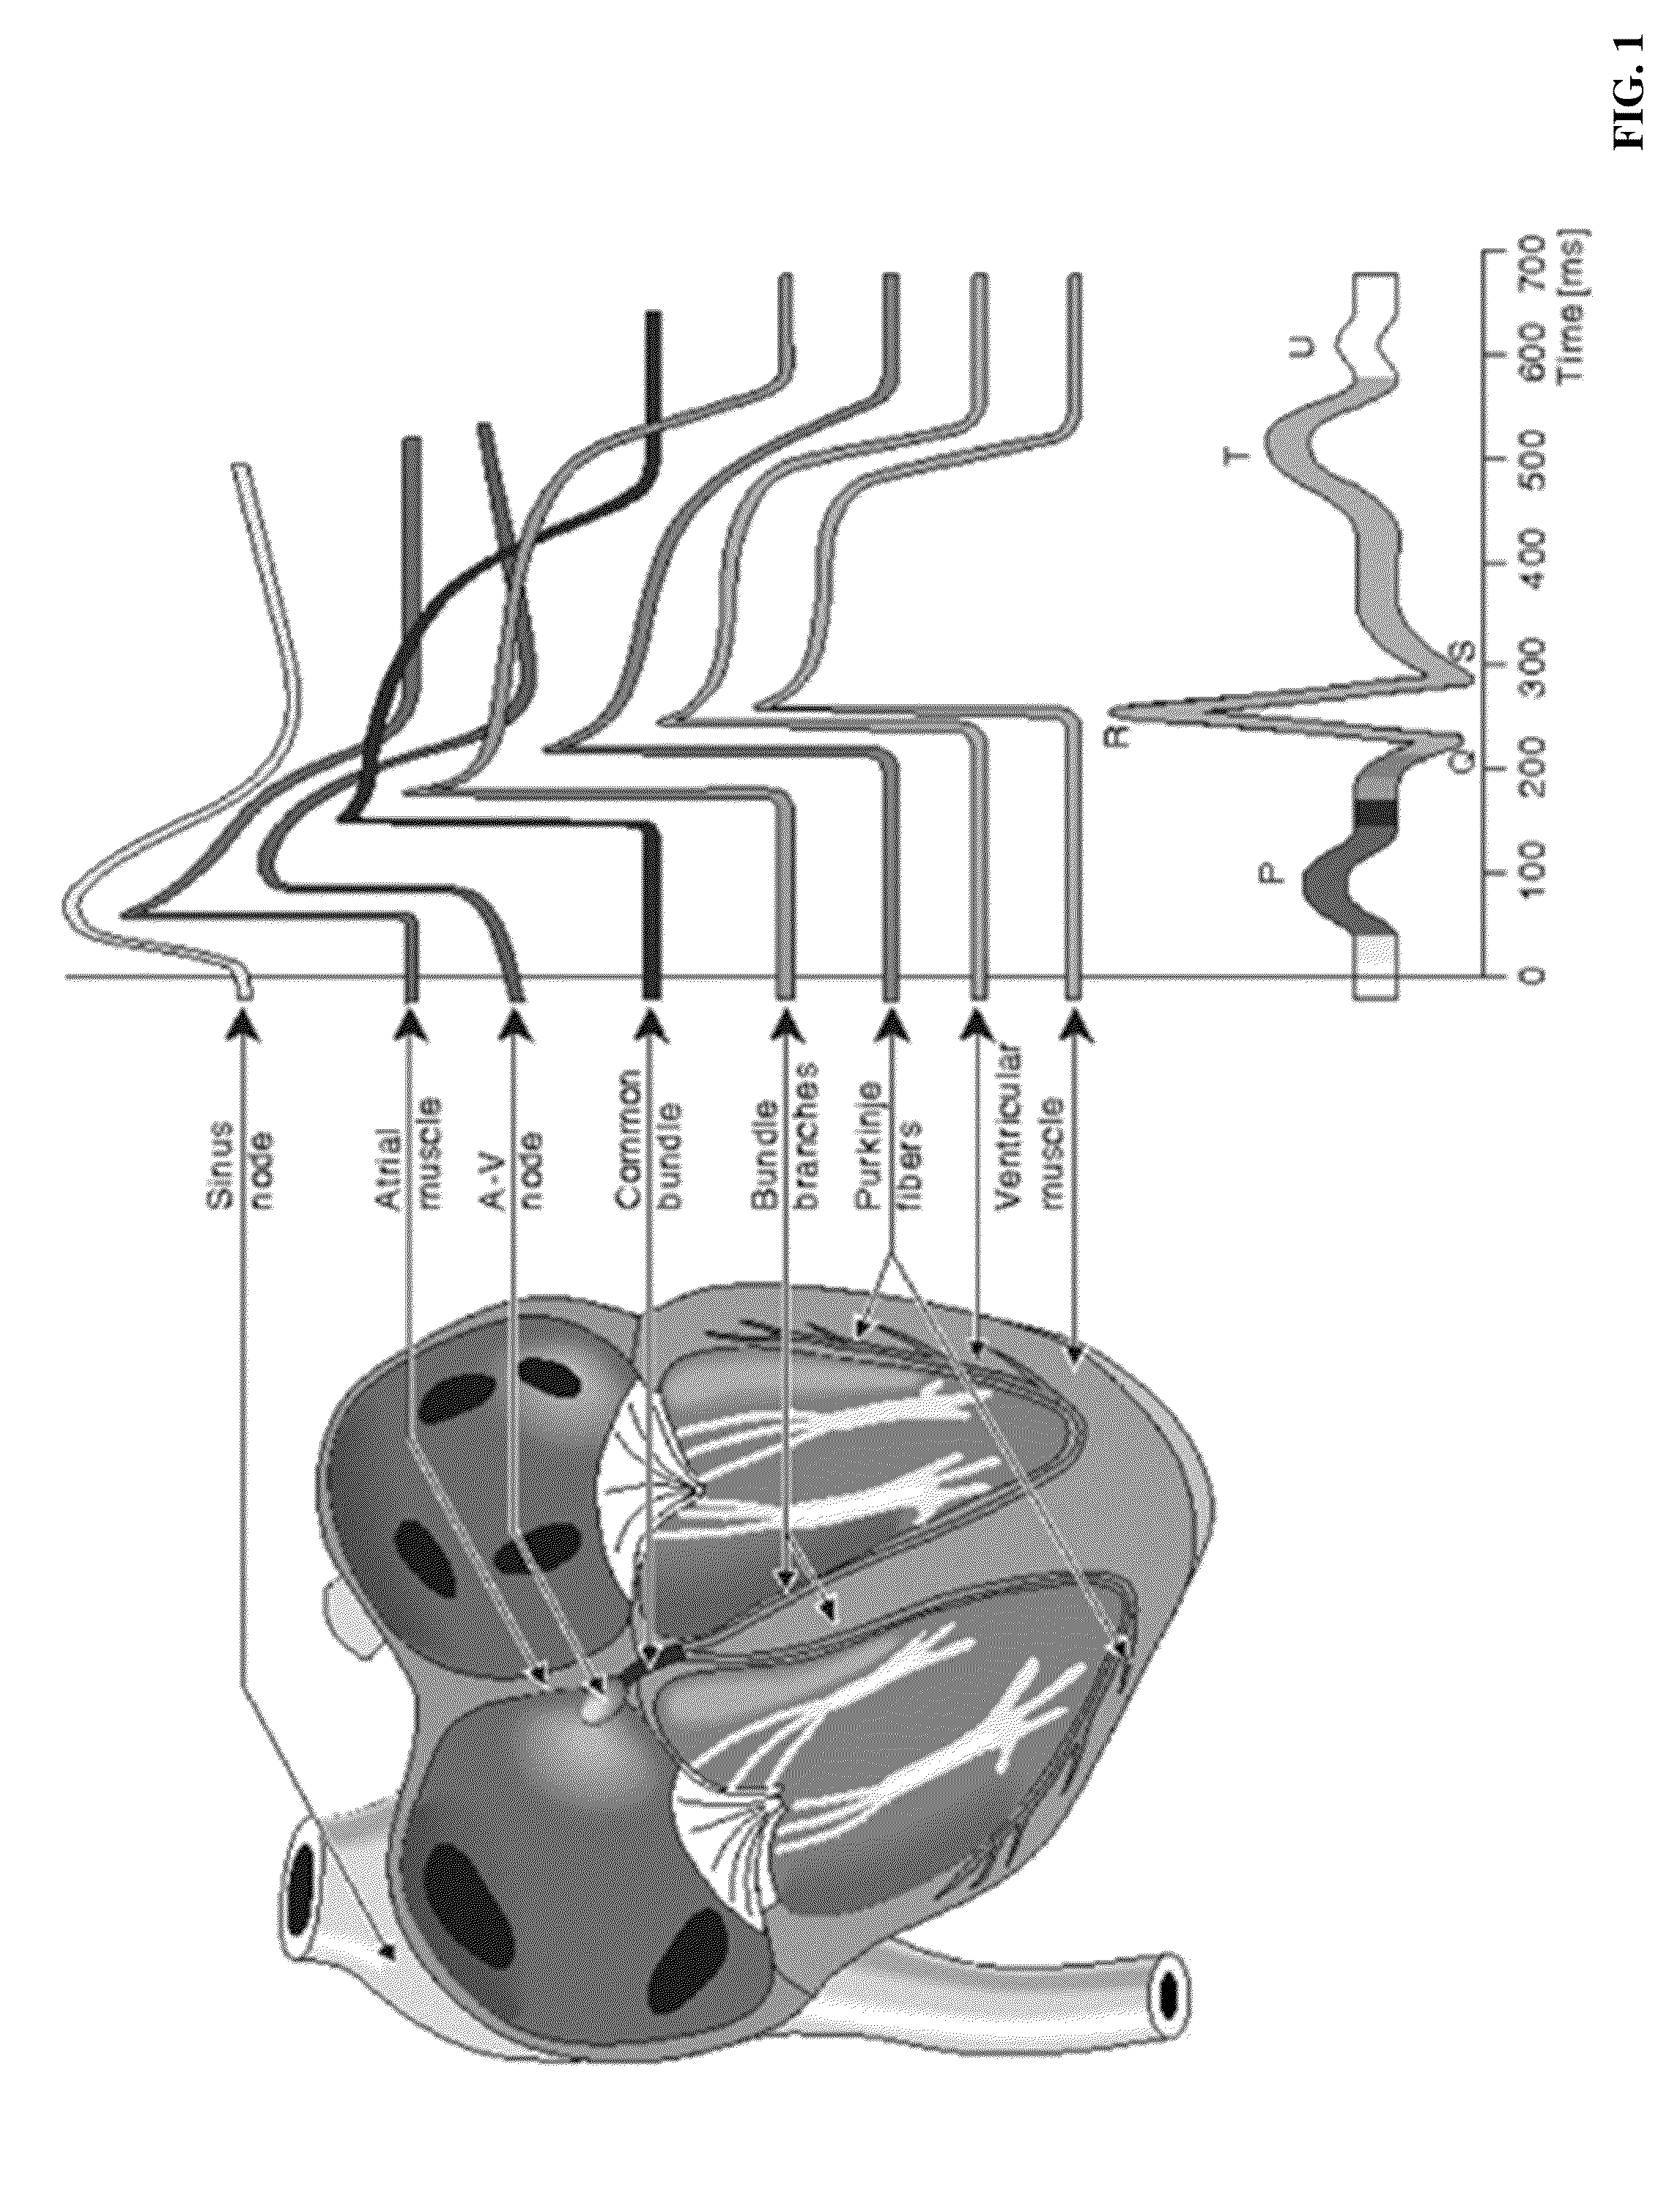 Passive method and system for contact and/or non-contact with or without intervening materials for detection and identification of the incidence, traverse and physiological condition of a living human at any instant